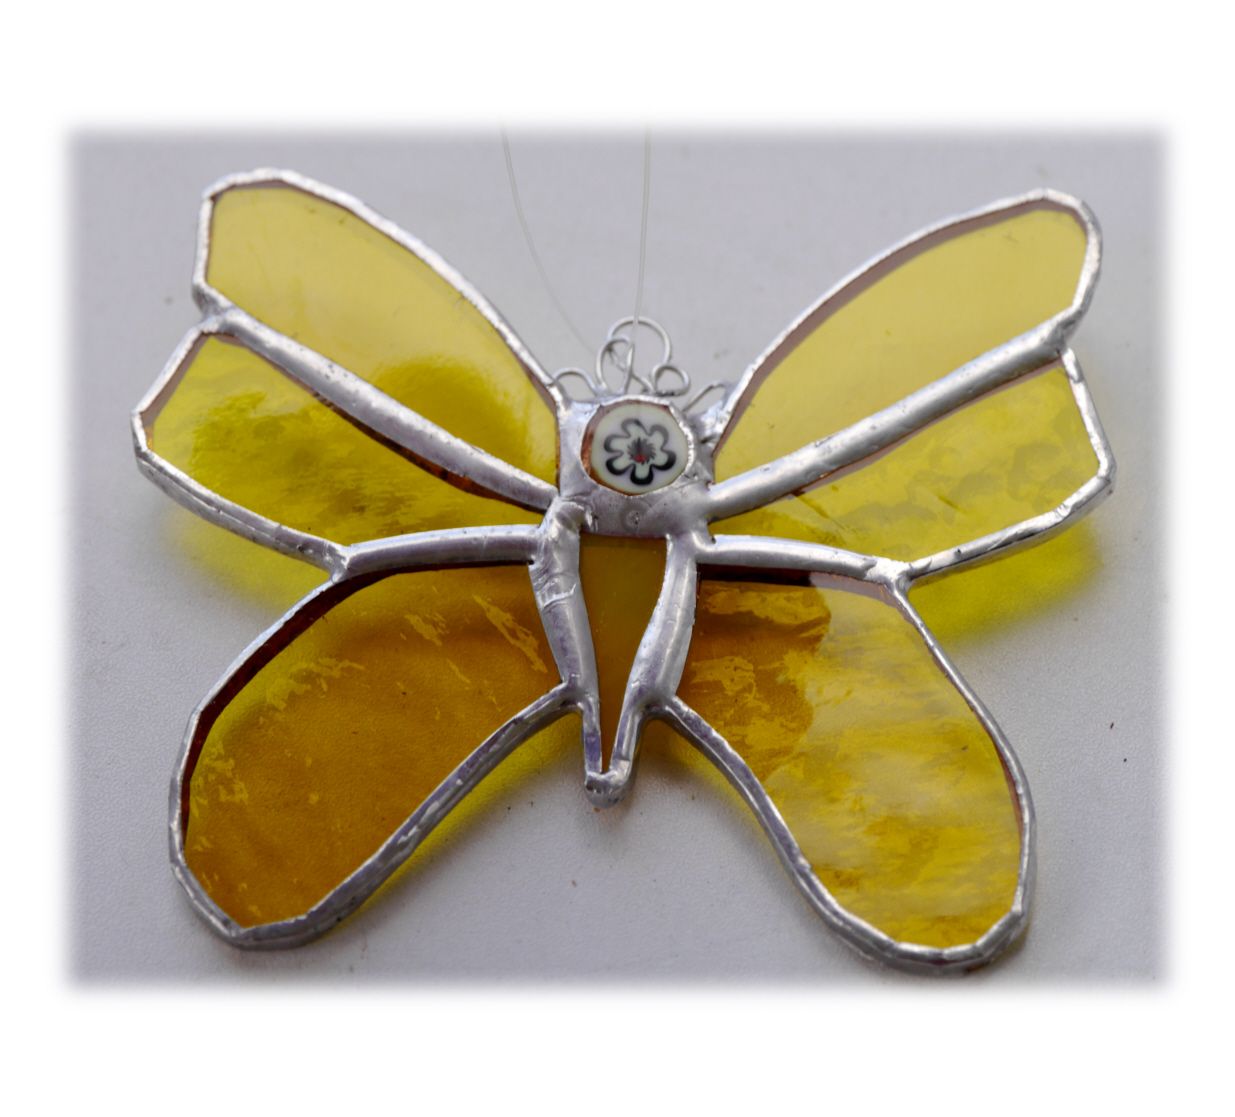 YELLOW Butterfly 11cm 060 Yellow #1907 FREE 9.00